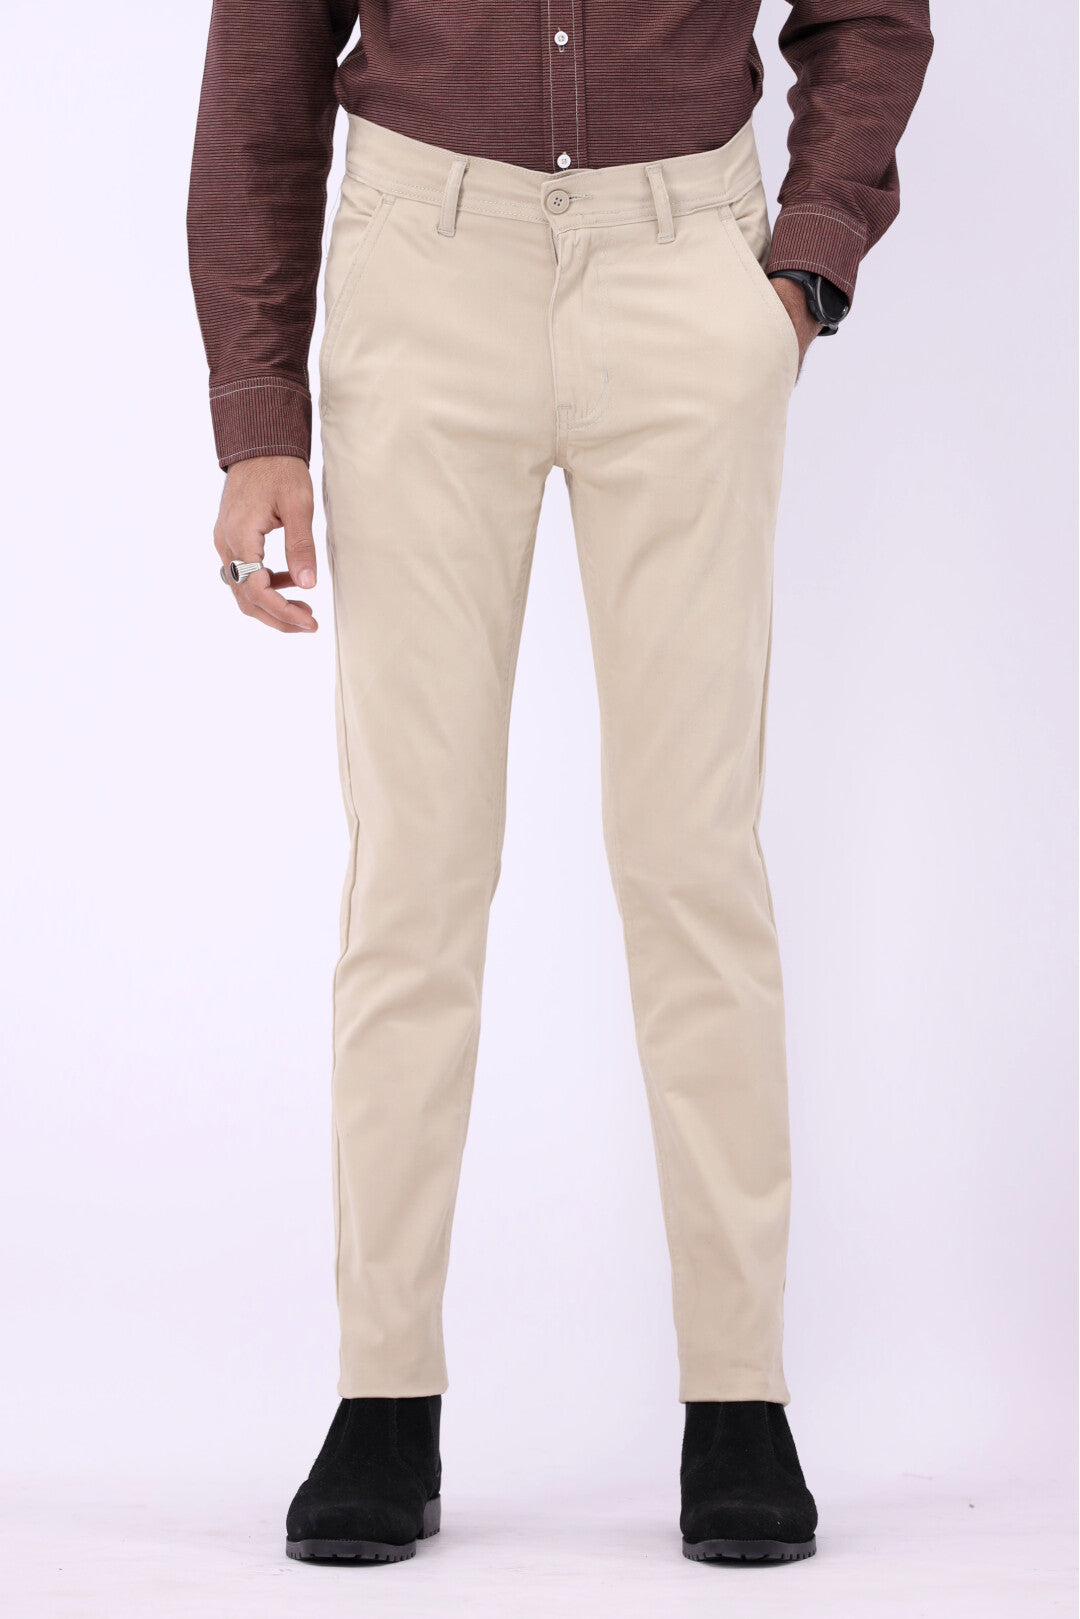 FT Cotton Chinos Pant - Beige